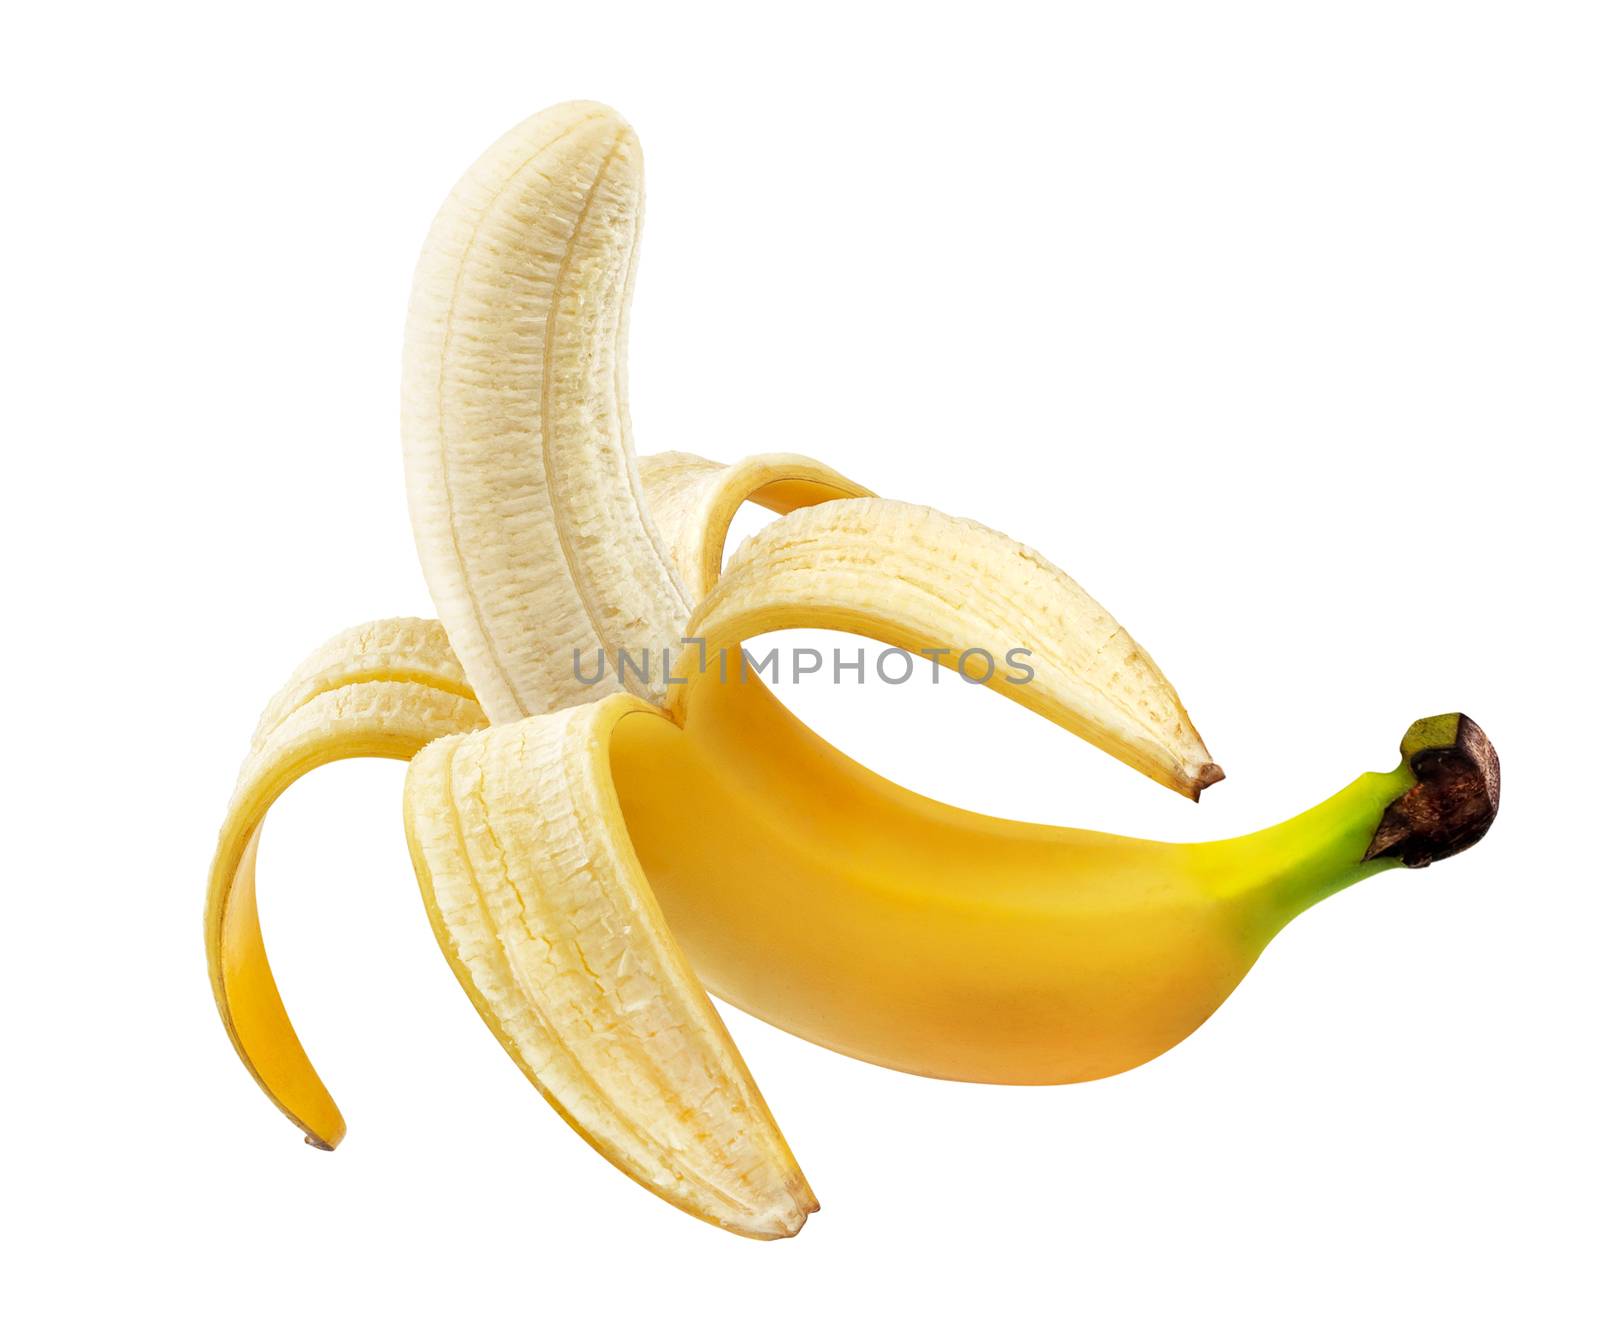 Peeled banana isolated on white background with clipping path by xamtiw